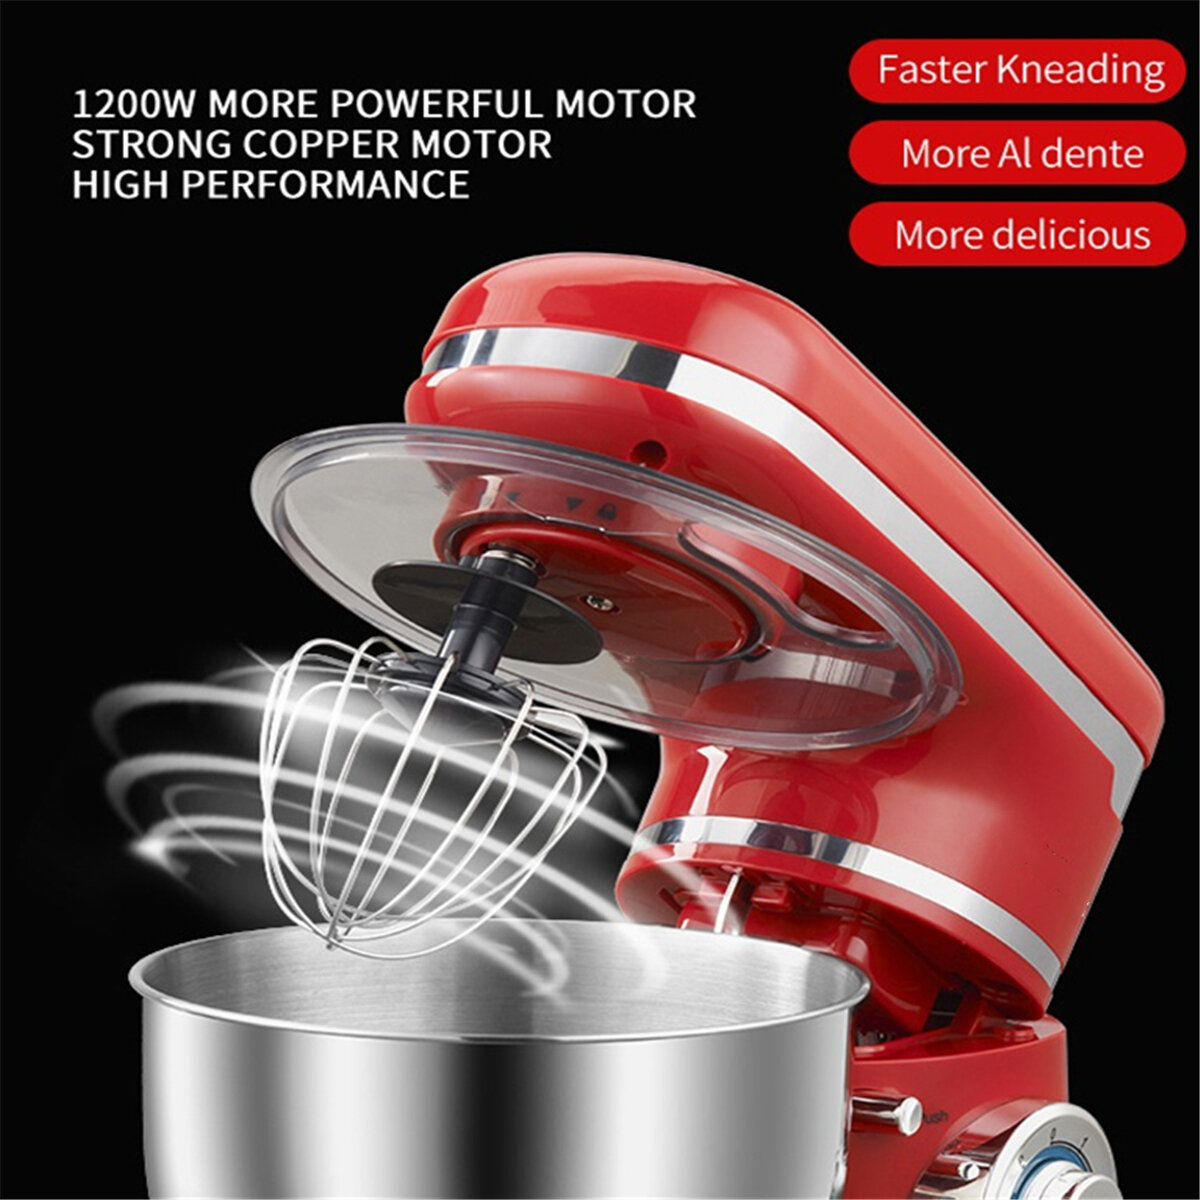 6-Speed Electric Mixer with Stainless Steel Bowl Dough Hook Red GWELL Tilt-Head Stand Mixer Beater and Whisk 